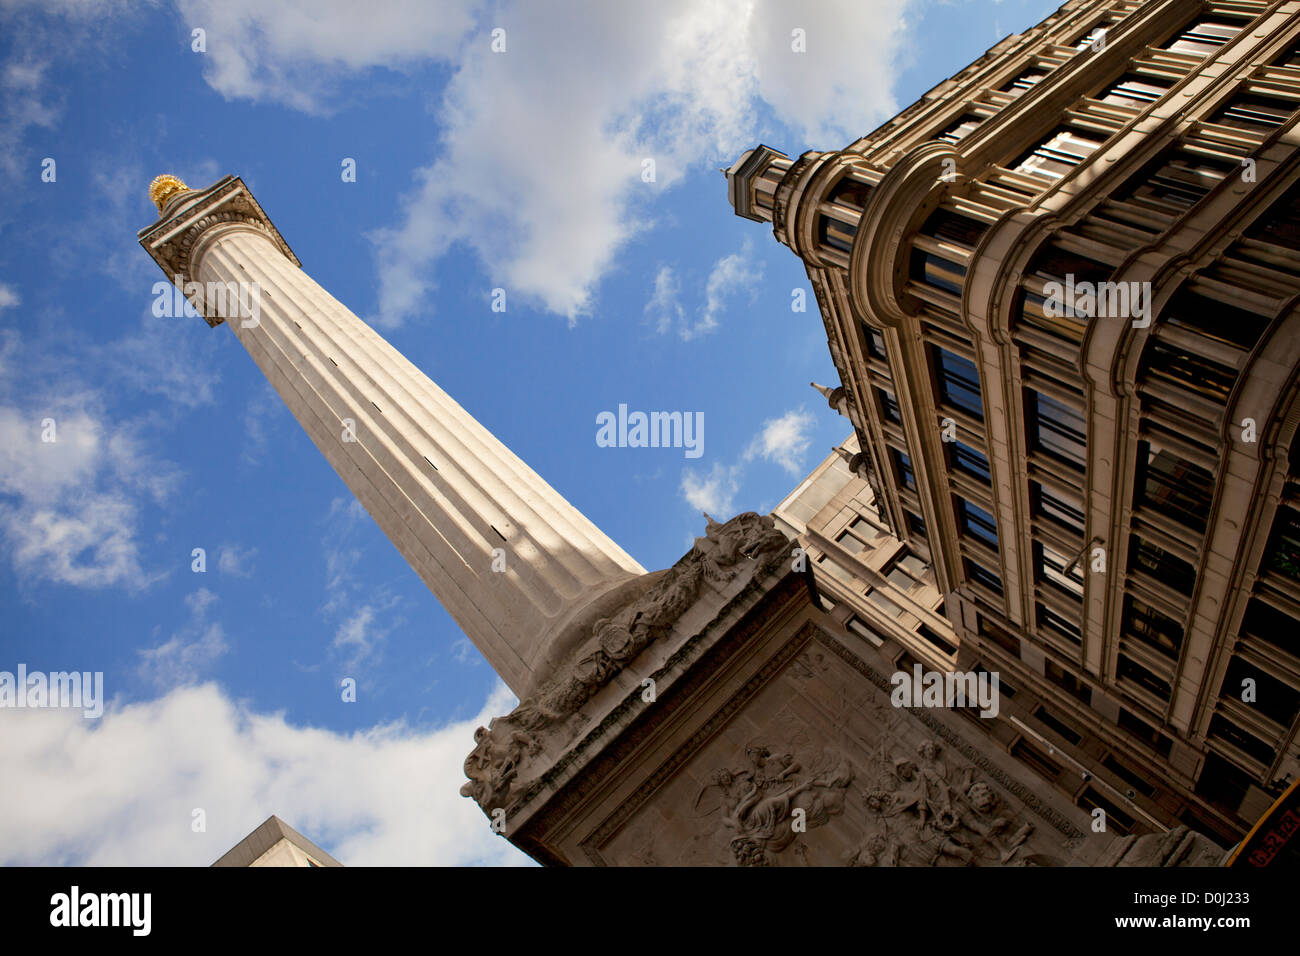 A view of the Monument in central London. Stock Photo